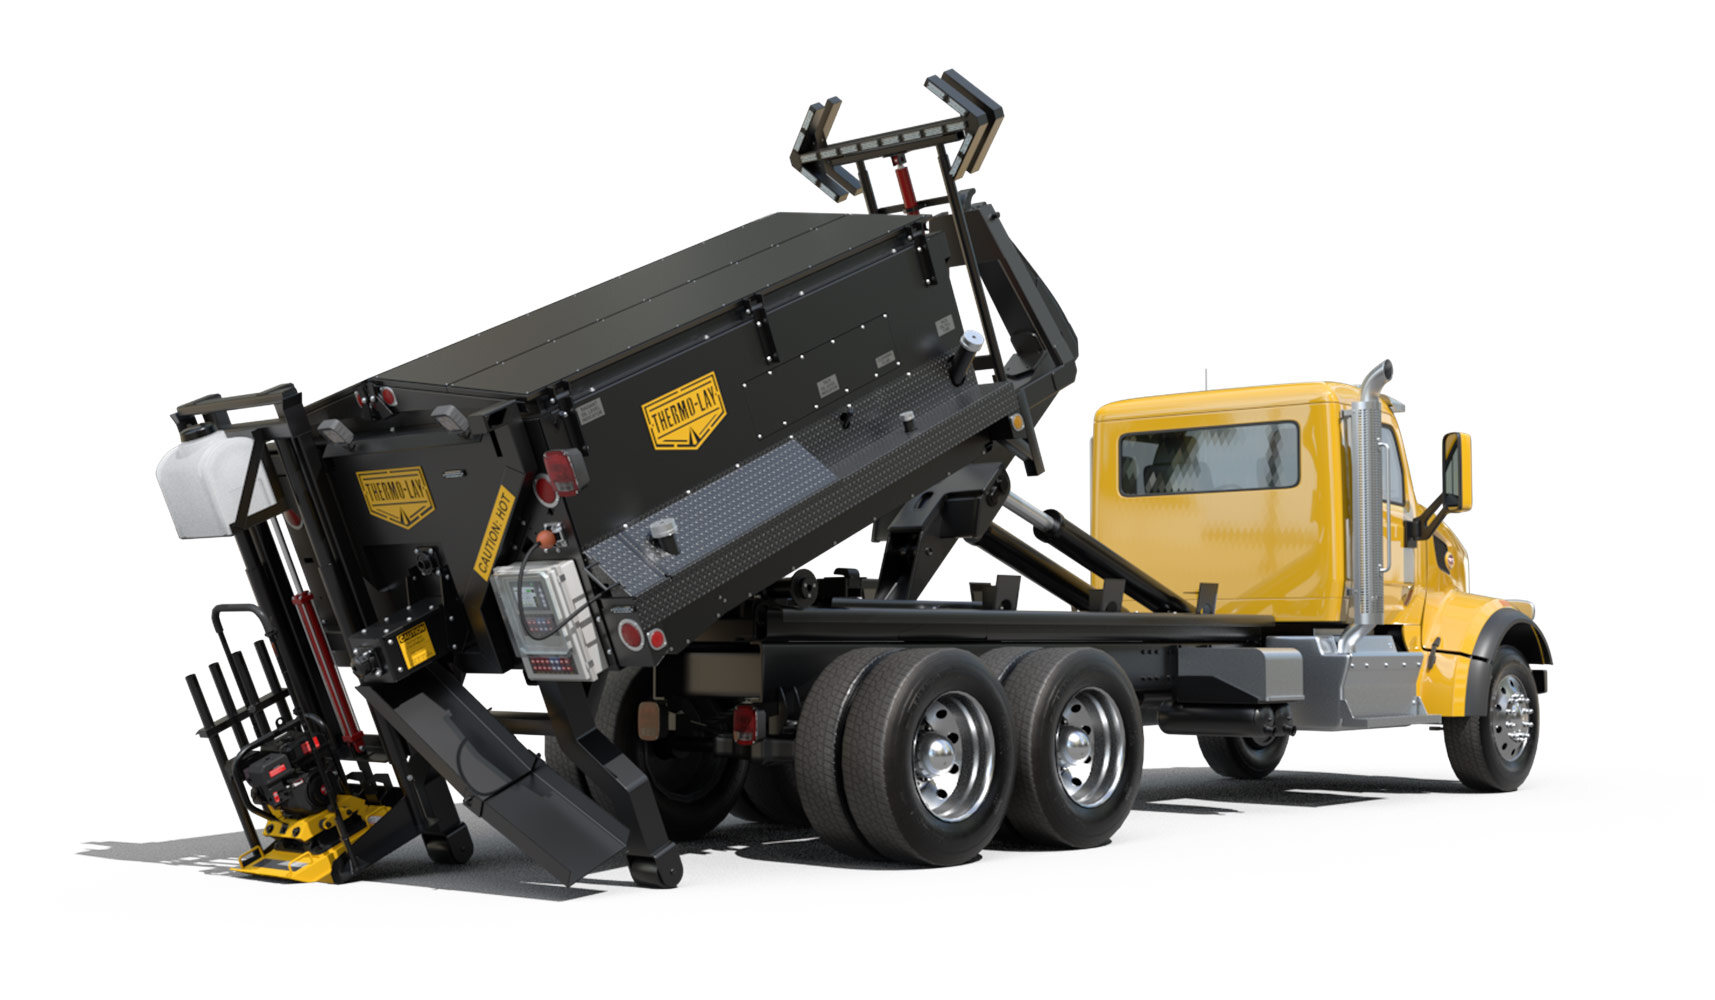 Thermo-Lay's Hook Lift Asphalt Patching Machine